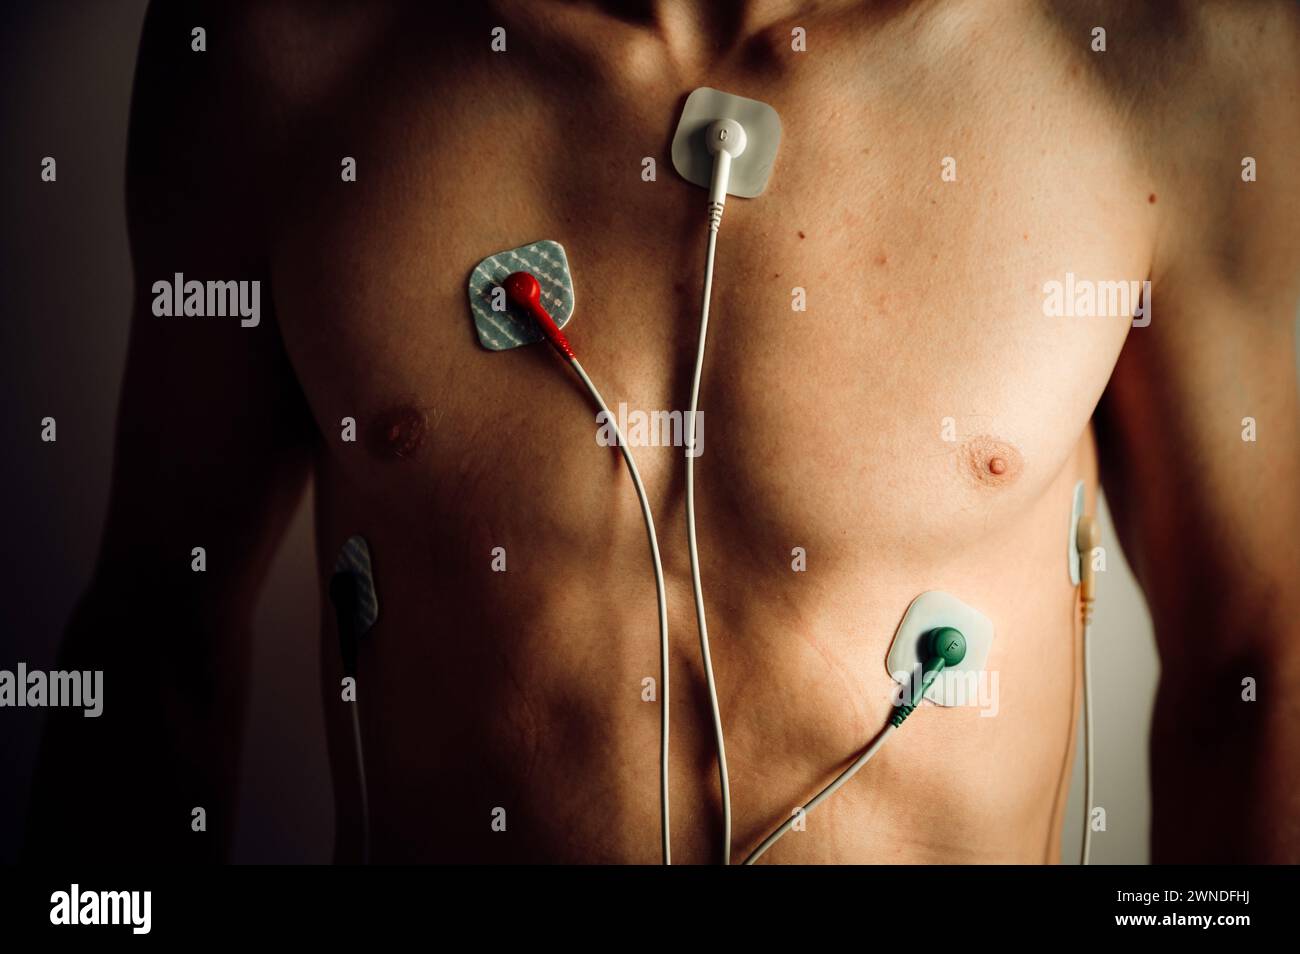 Heart monitor, EKG, cardio recording placed on the body of a young man. A medical tool for monitoring heart rate and overall heart health. Electrocard Stock Photo